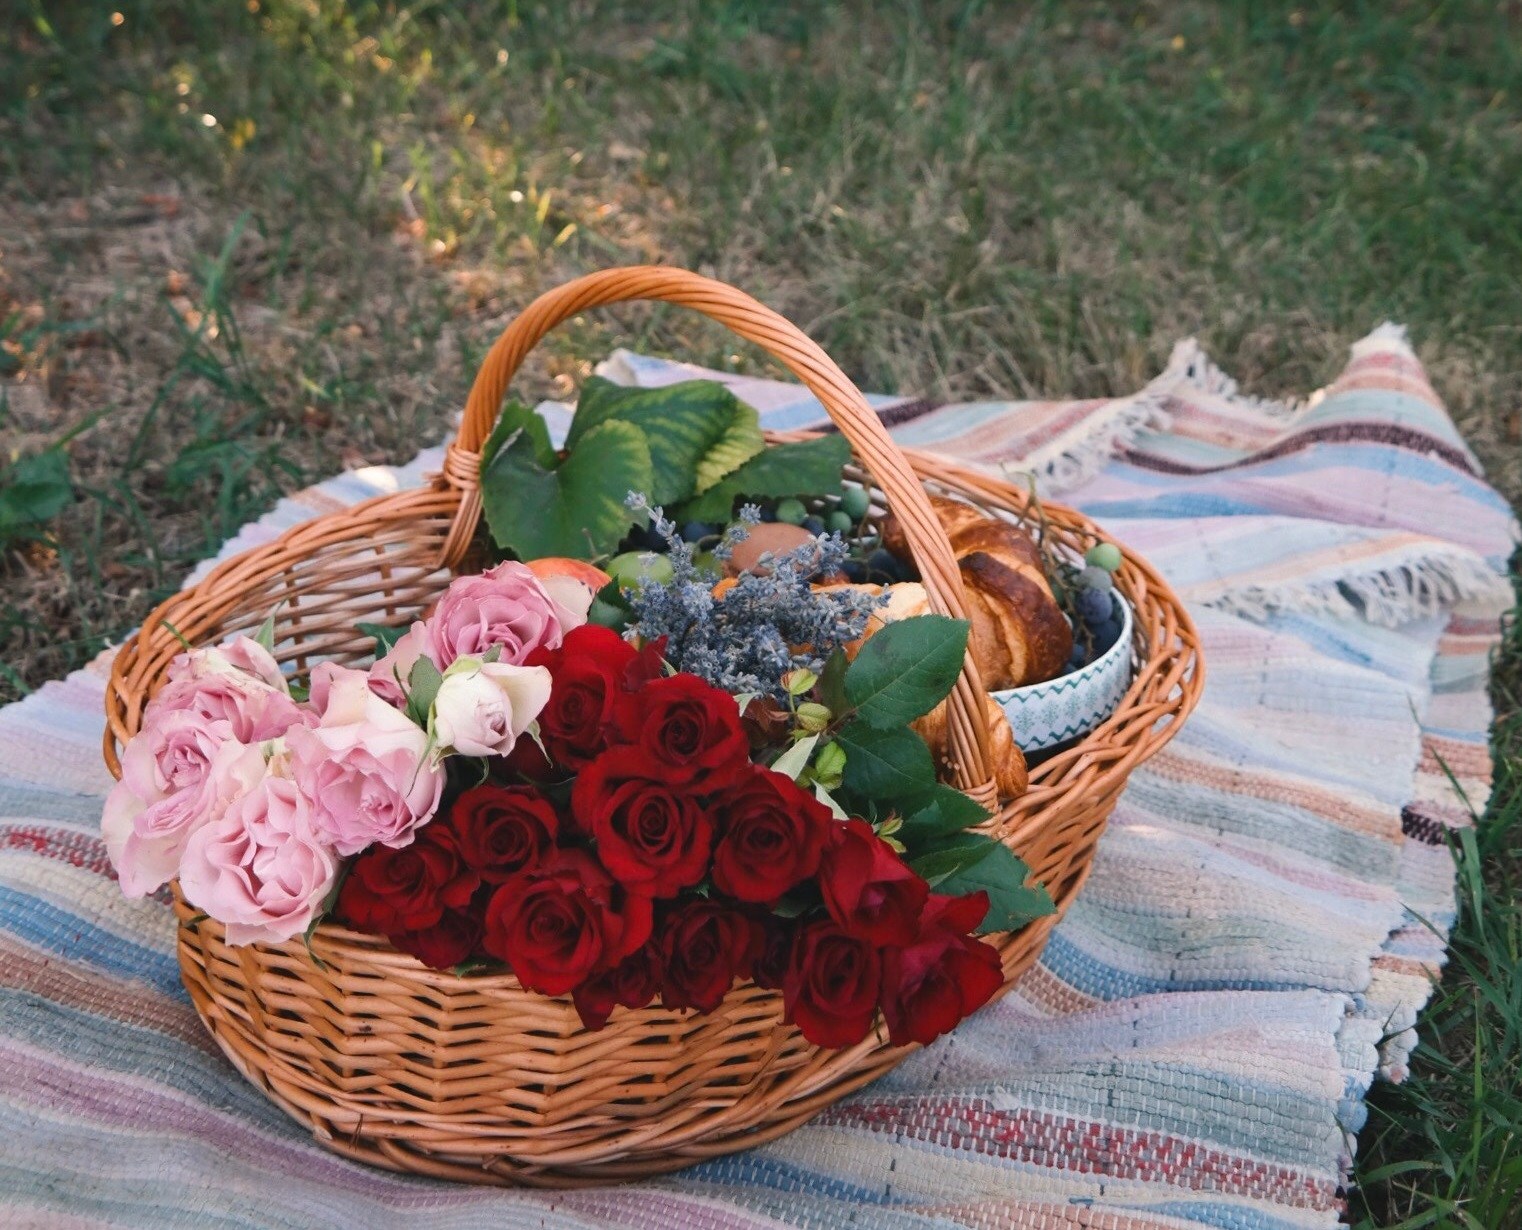 We All Need a Little Picnic Time